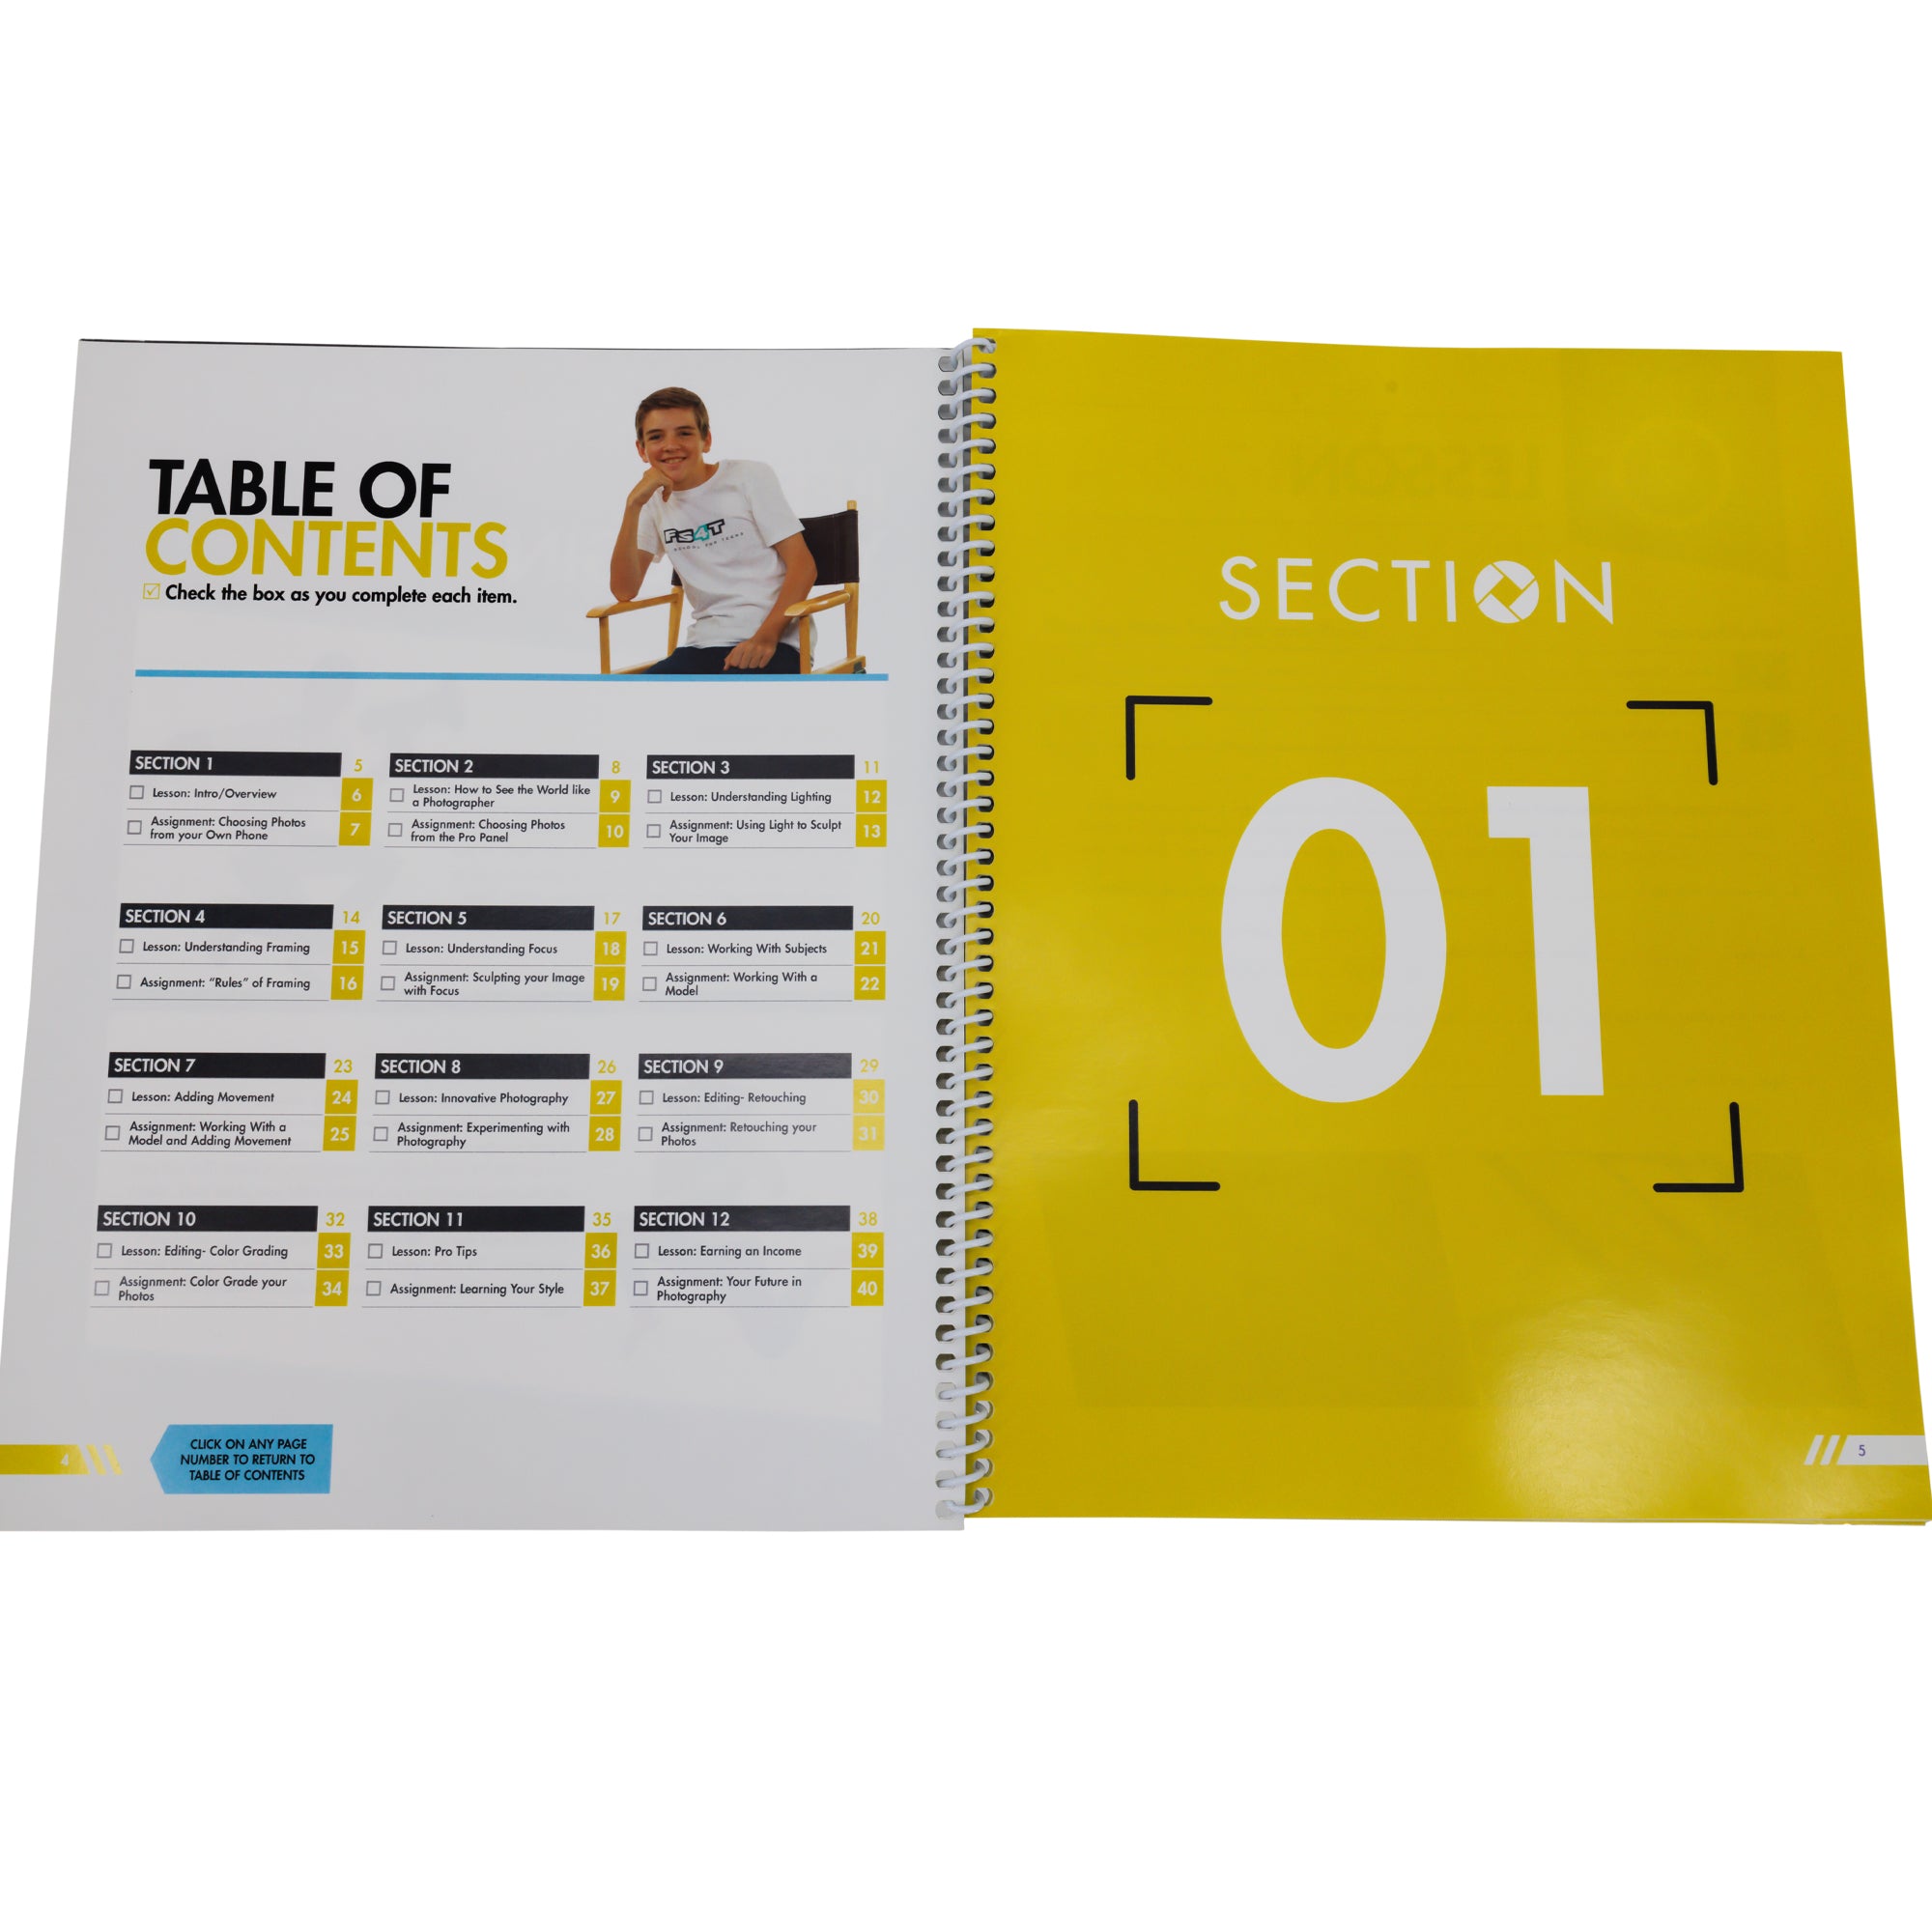 The spiral bound Intro to Photography 4 Teens workbook is open to show the table of contents. On the top-right of the left page is a smiling teenage boy sitting in a directors chair. The right page is all yellow with “Section 01” printed in the middle in white.